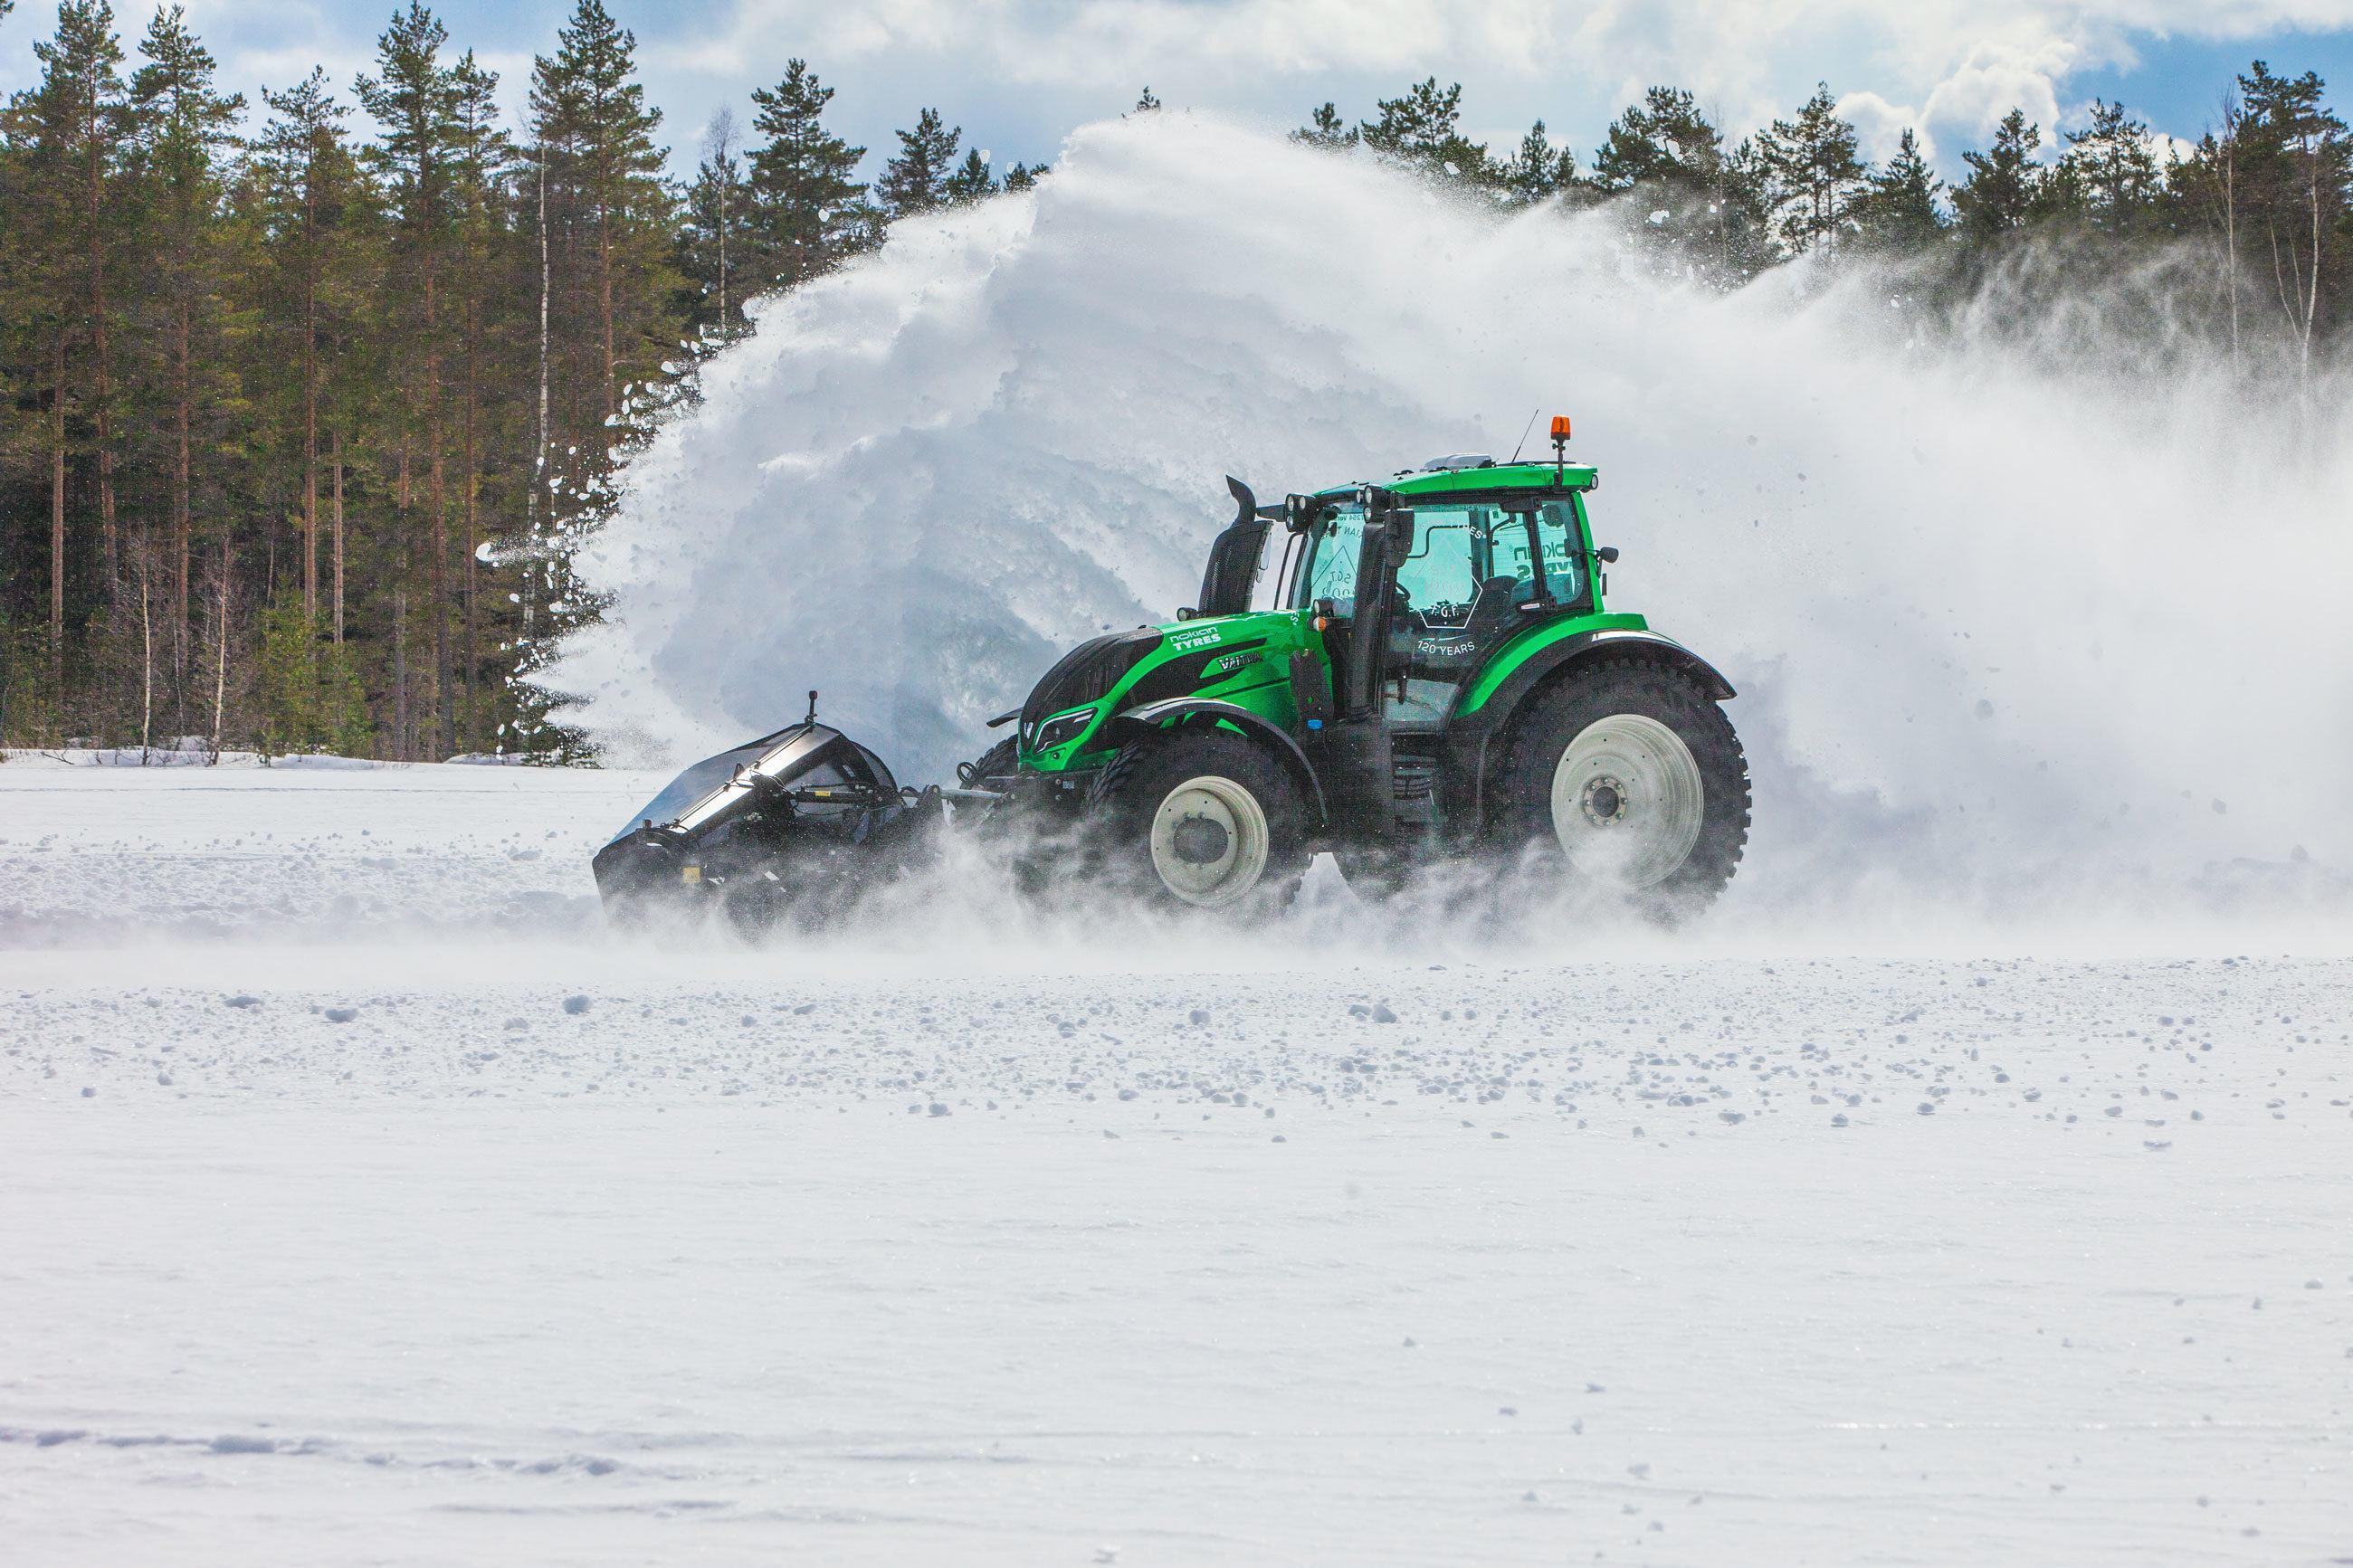 Valtra unmanned tractor sweeping snow 73km/h Nokian Tyres Snowrace